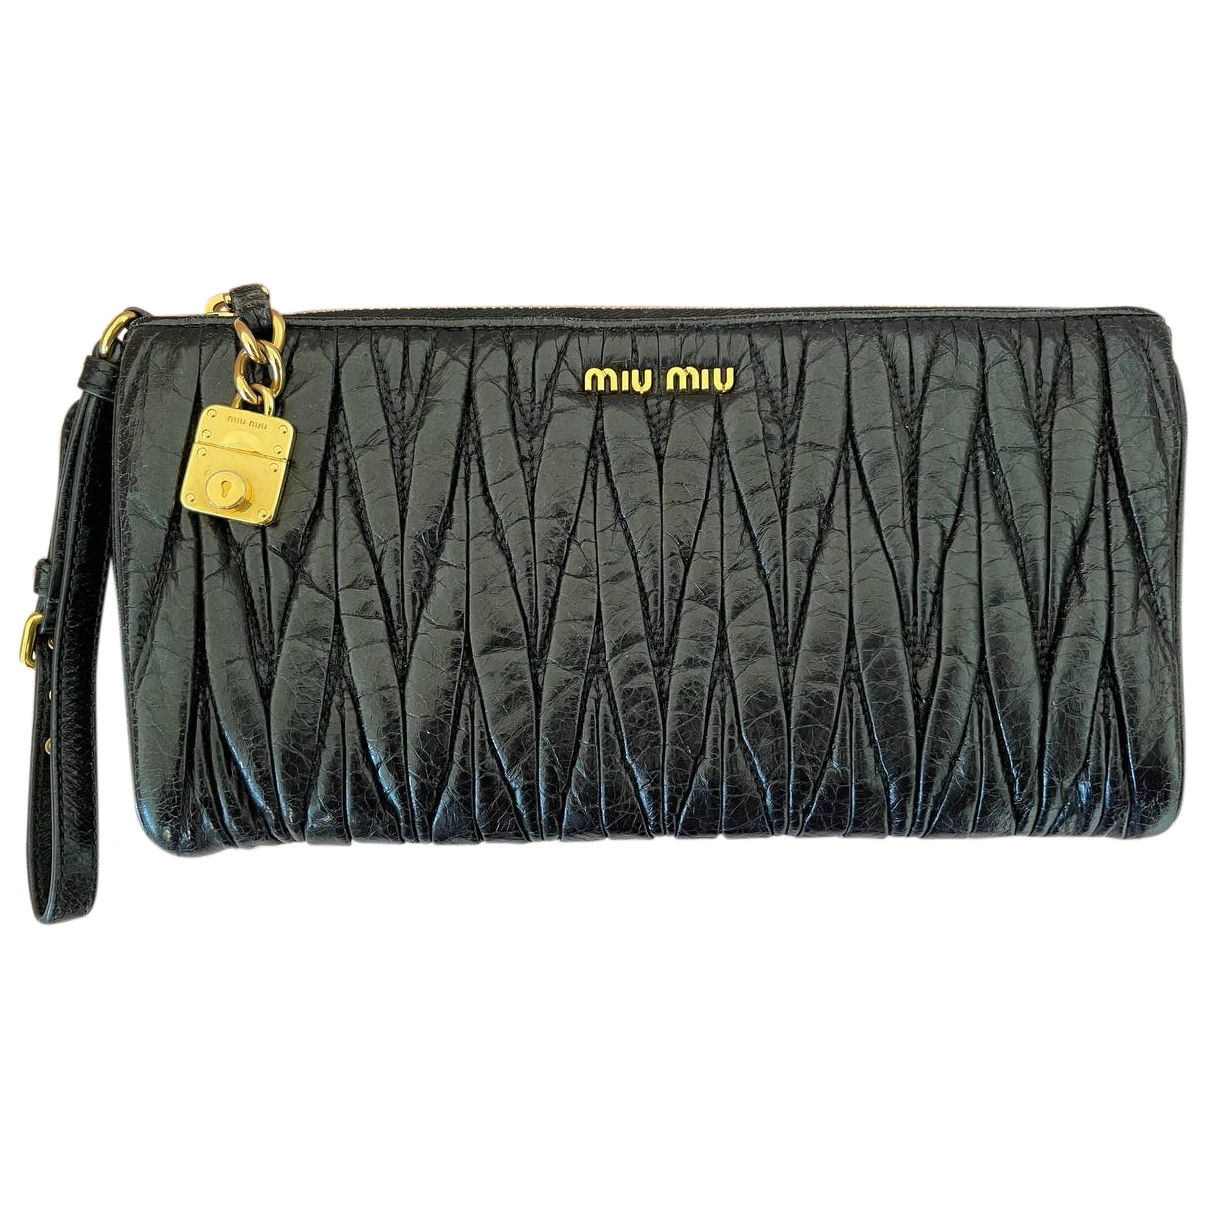 bags Miu Miu clutch bags for Female Leather. Used condition